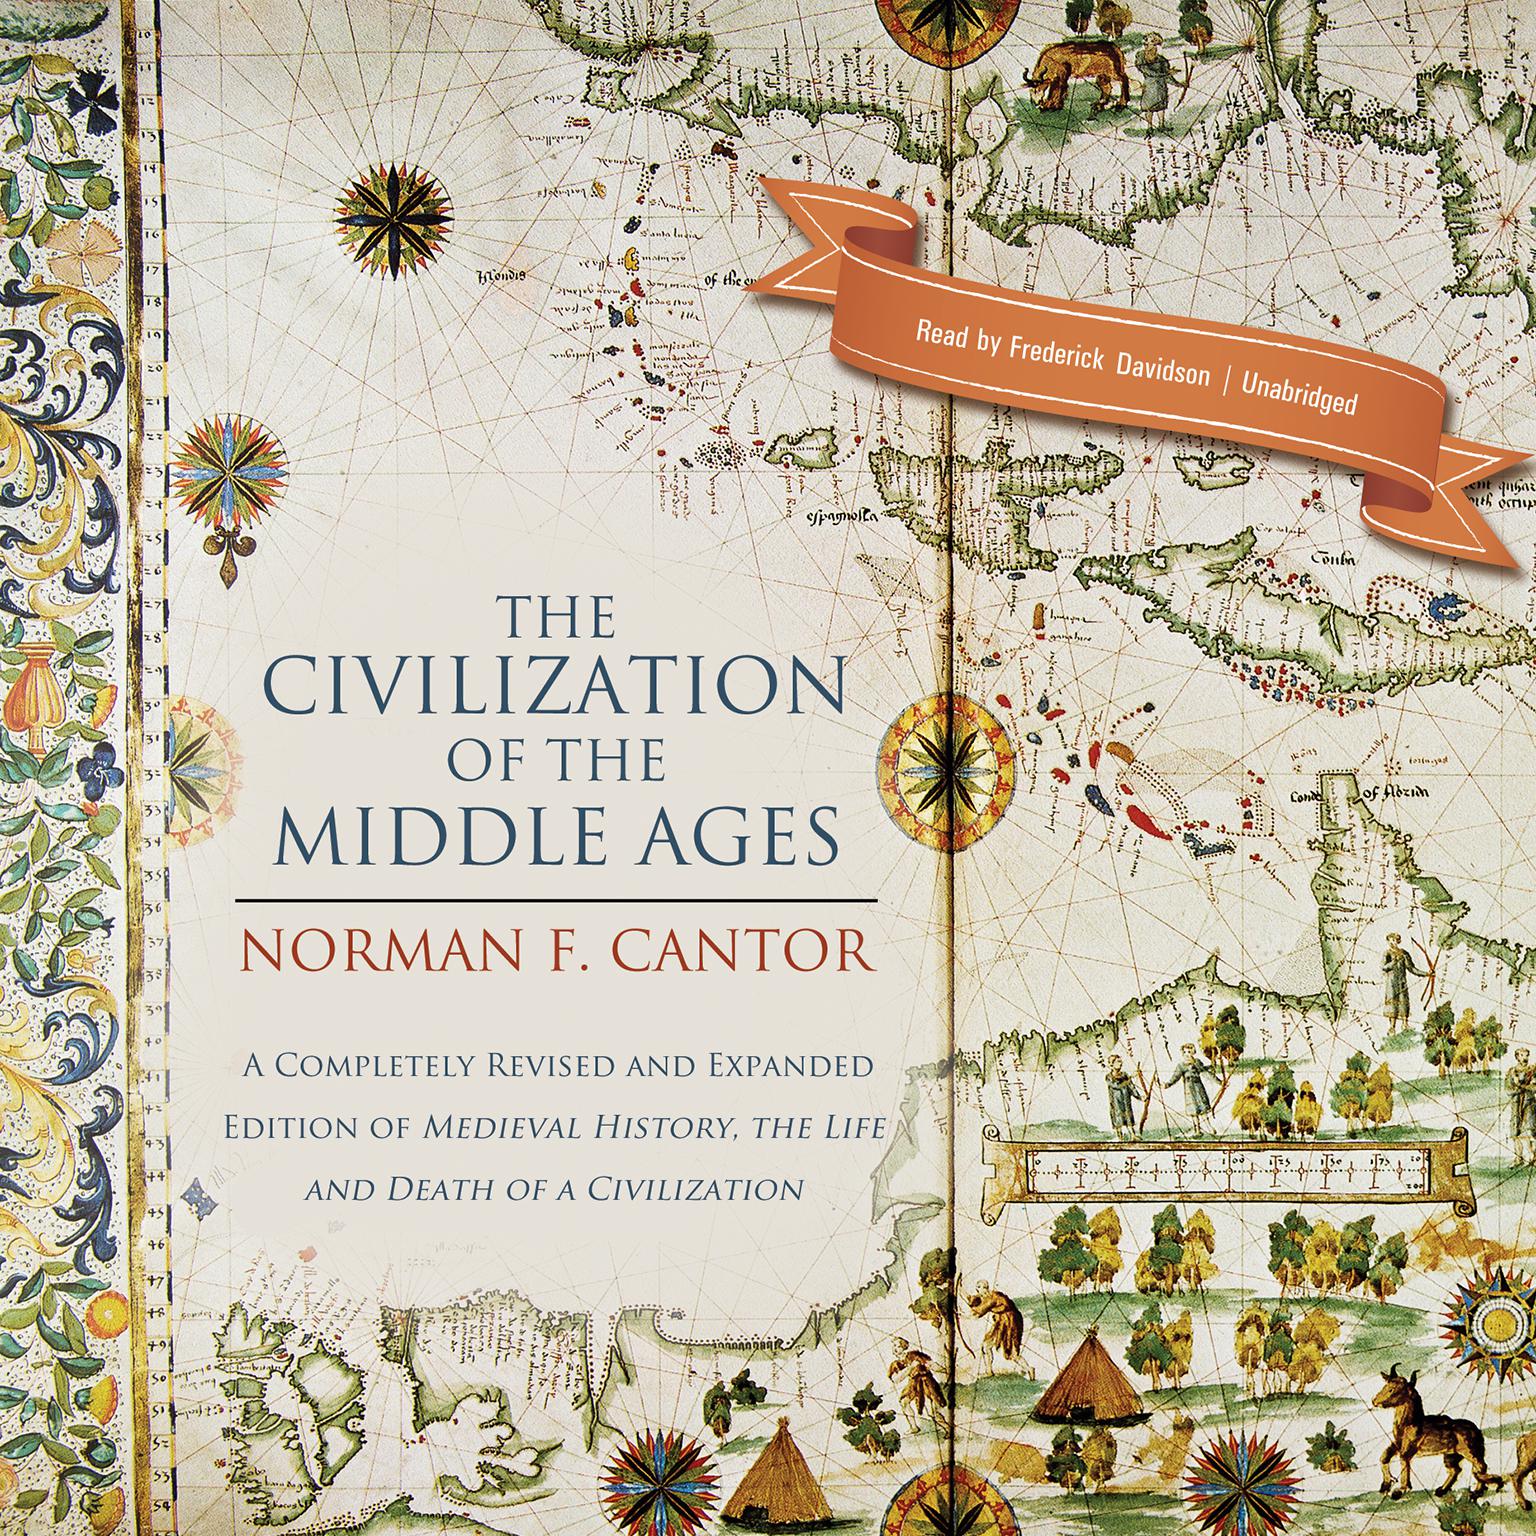 The Civilization of the Middle Ages: A Completely Revised and Expanded Edition of Medieval History, the Life and Death of a Civilization Audiobook, by Norman F. Cantor